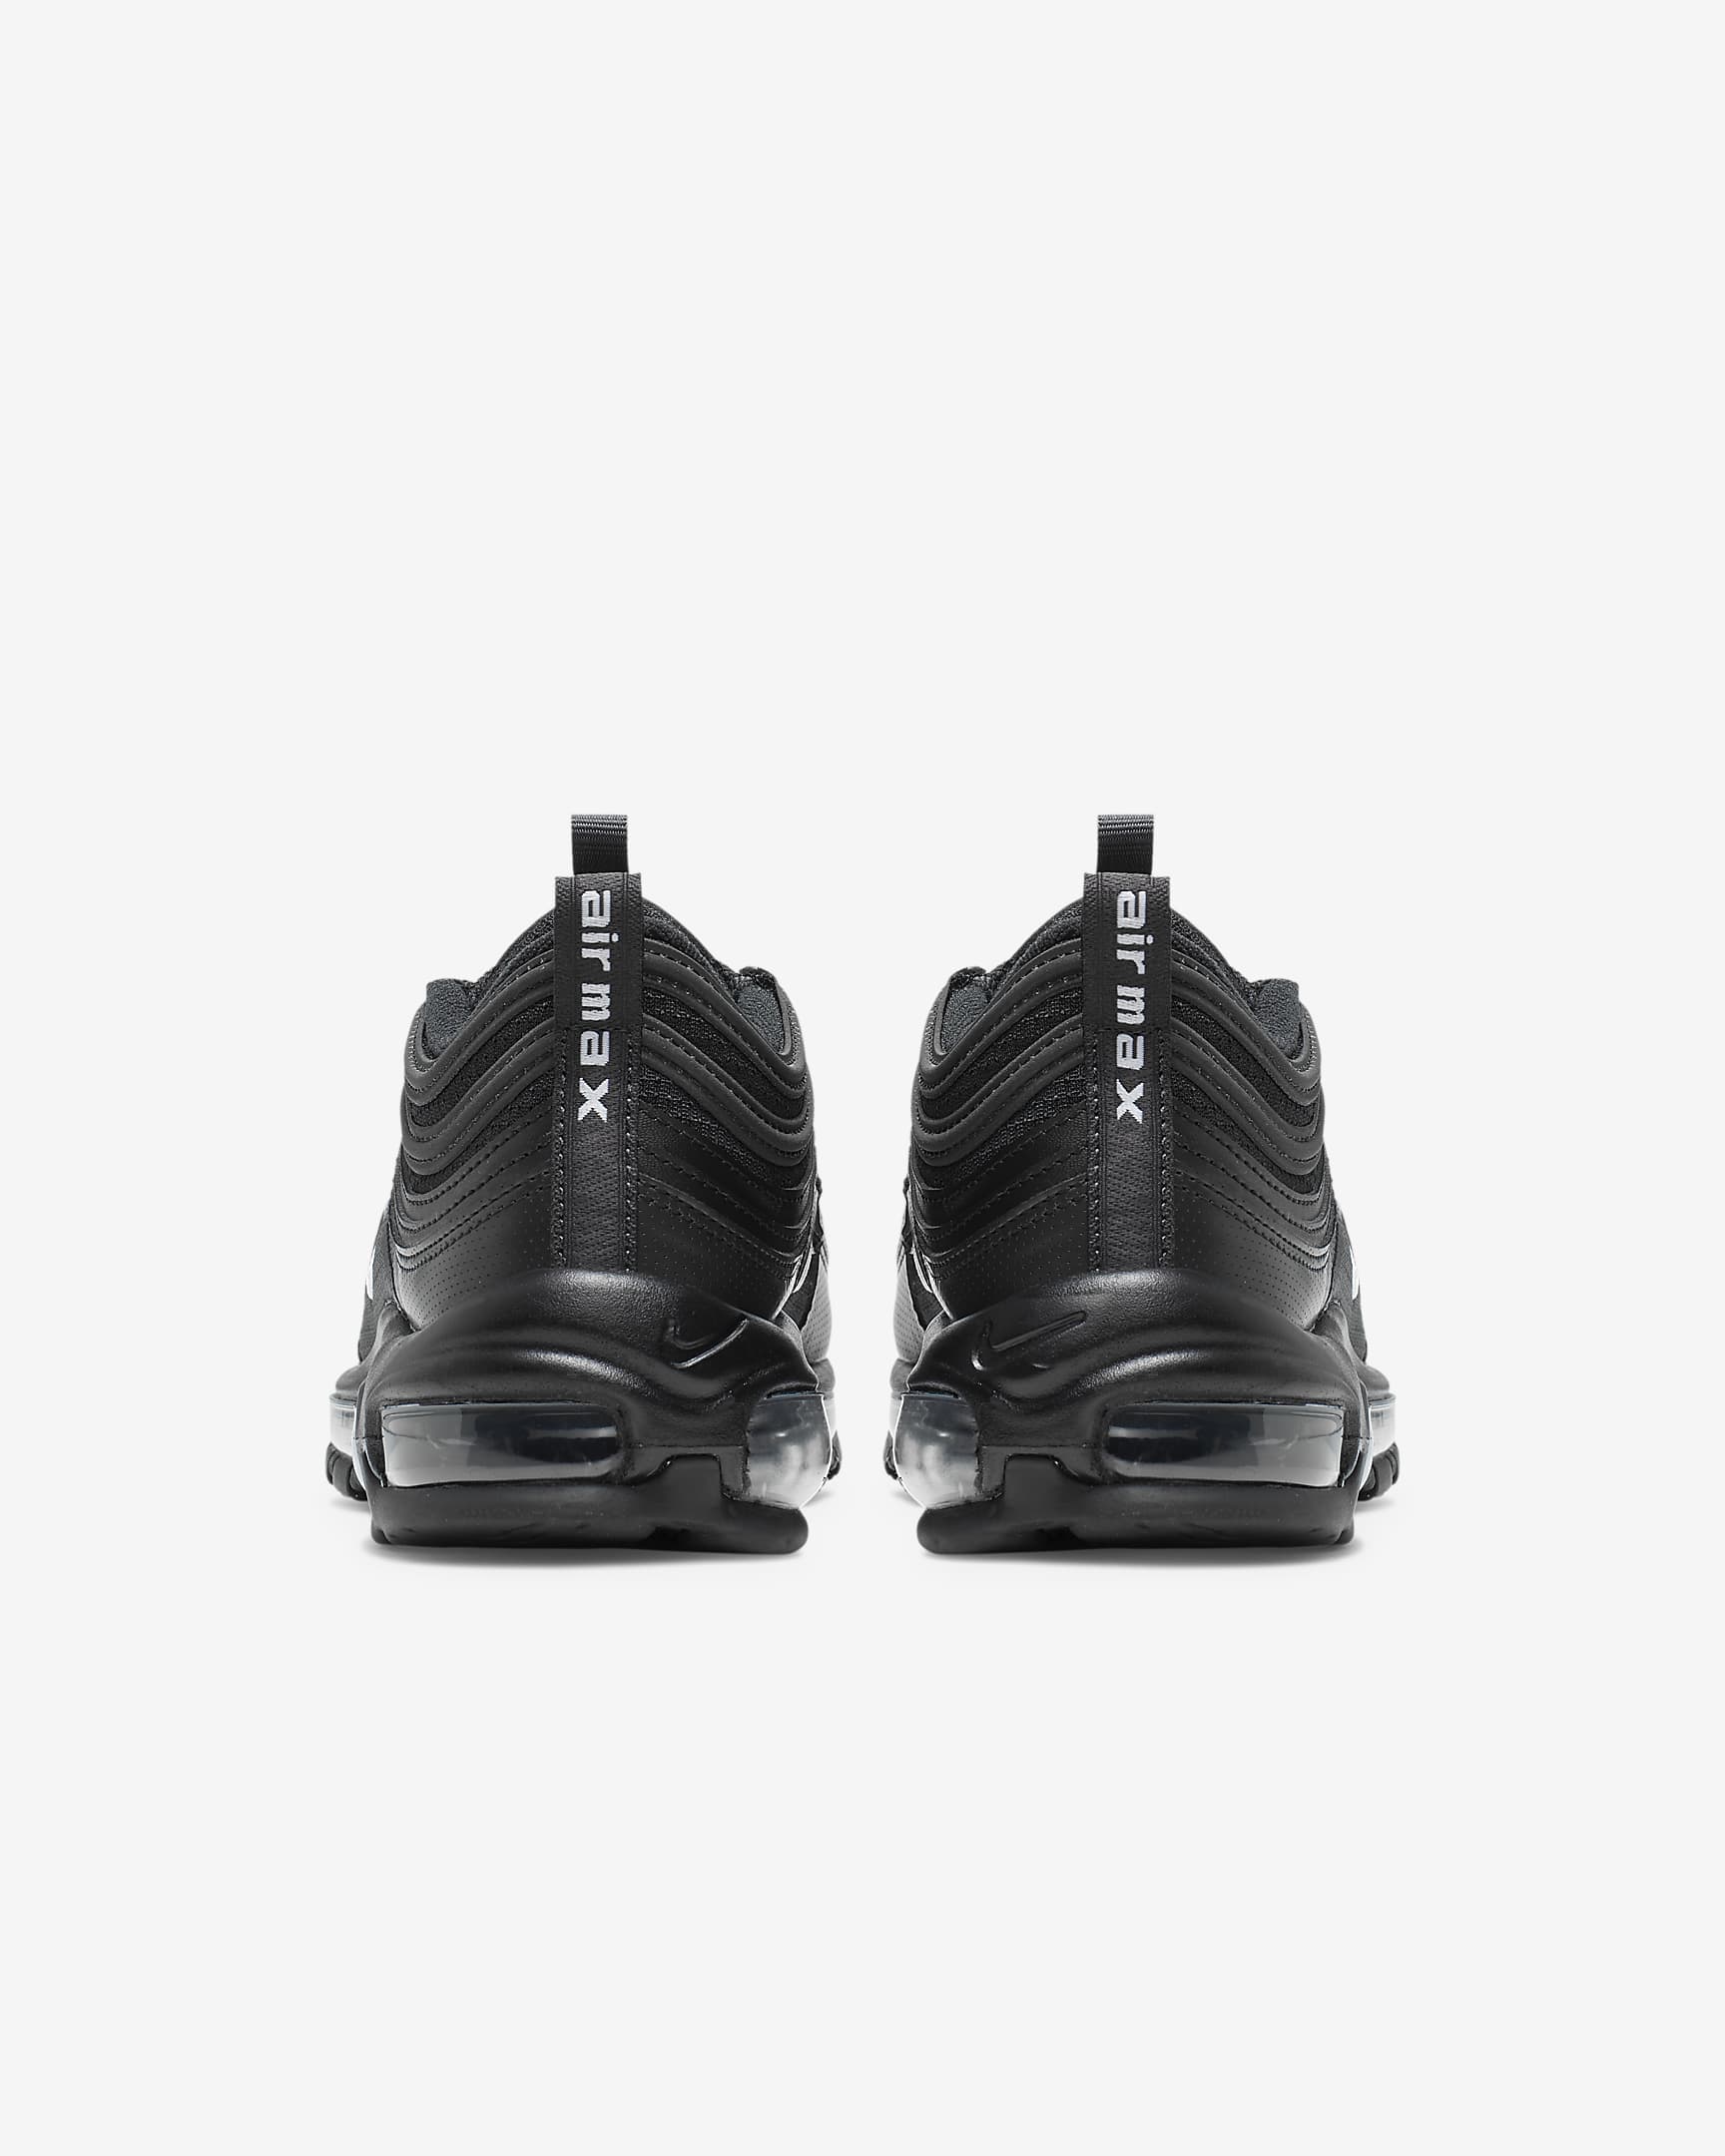 Nike Air Max 97 Older Kids' Shoes - Black/Anthracite/White